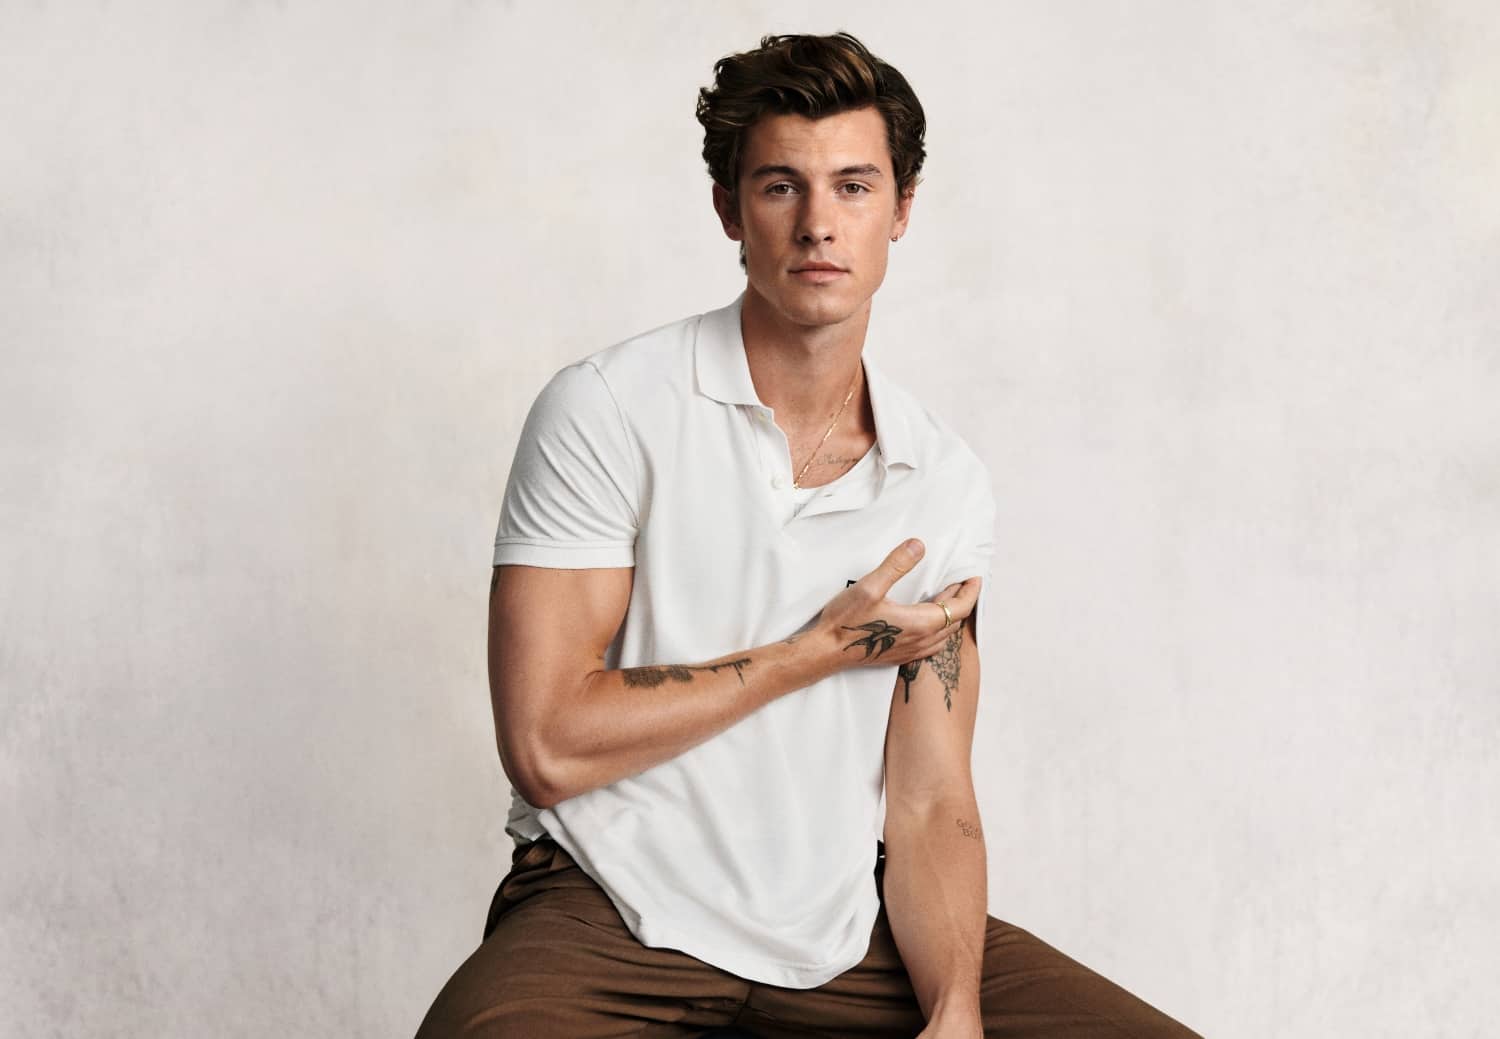 Lauren Sherman’s Next Move, Shawn Mendes Teams Up With Tommy Hilfiger